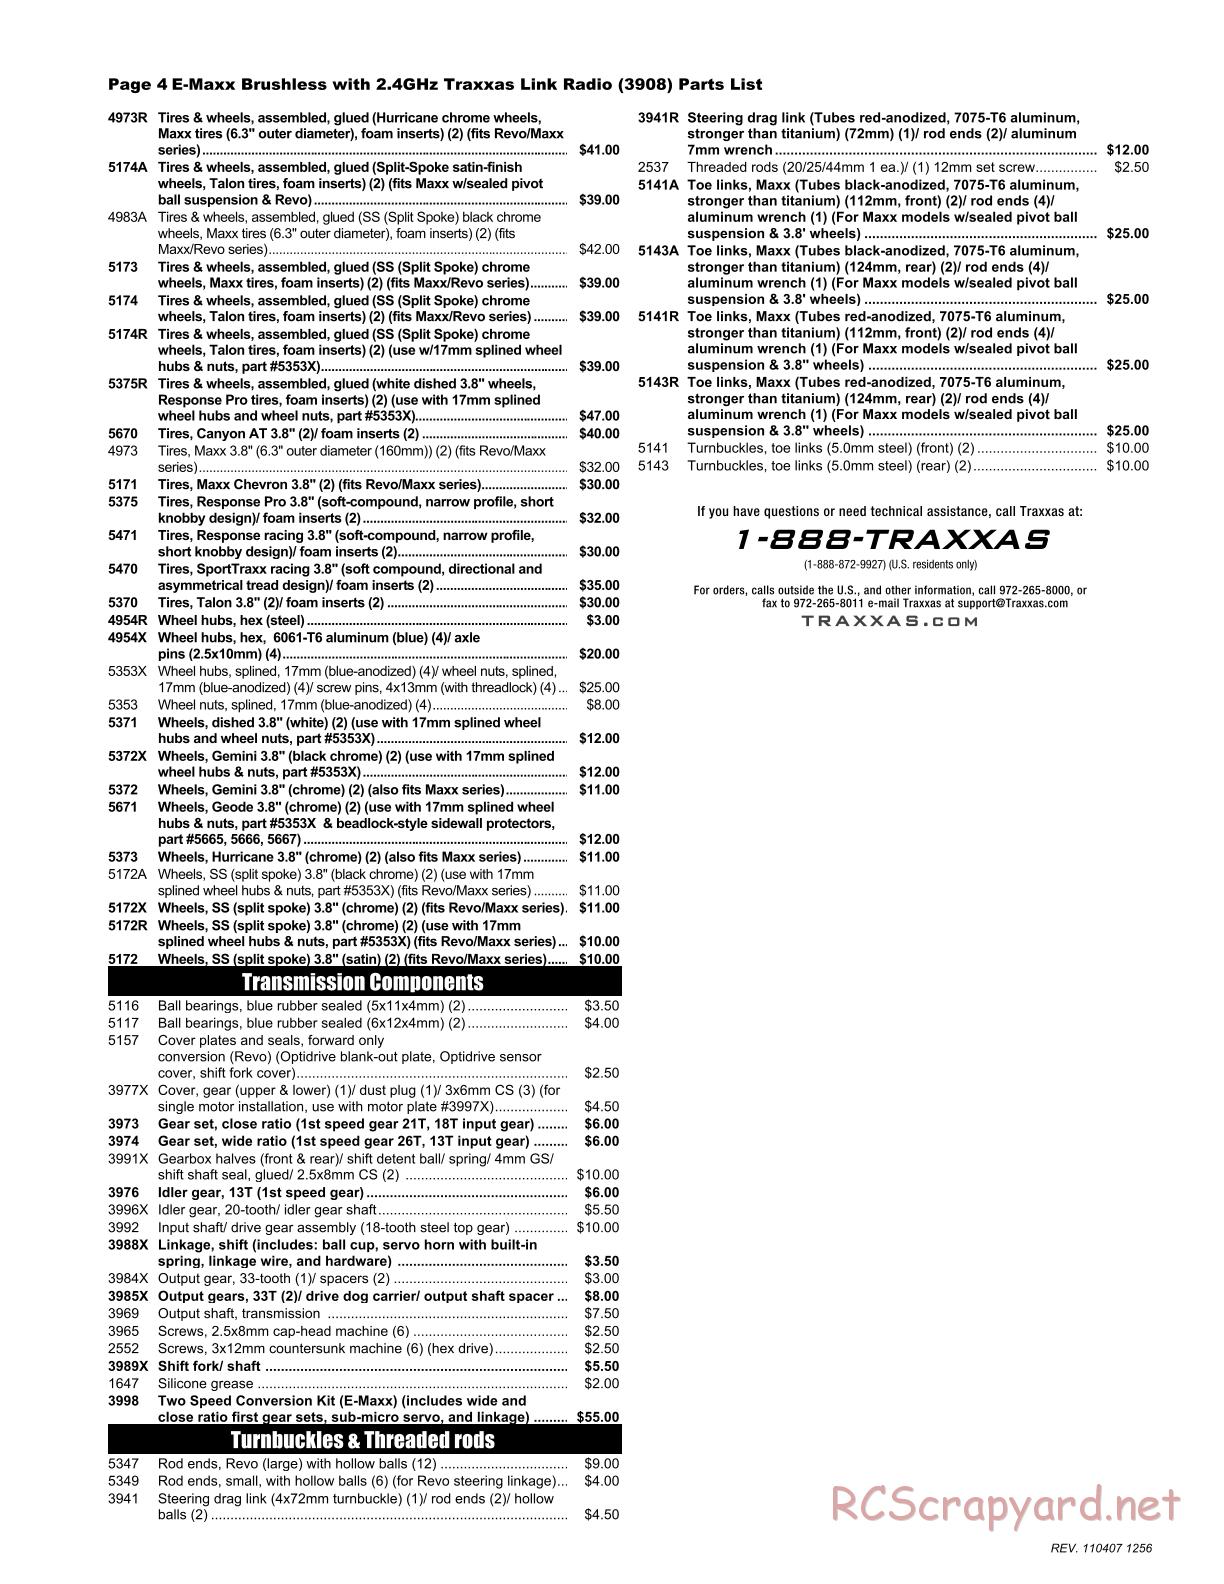 Traxxas - E-Maxx Brushless - Parts List - Page 4